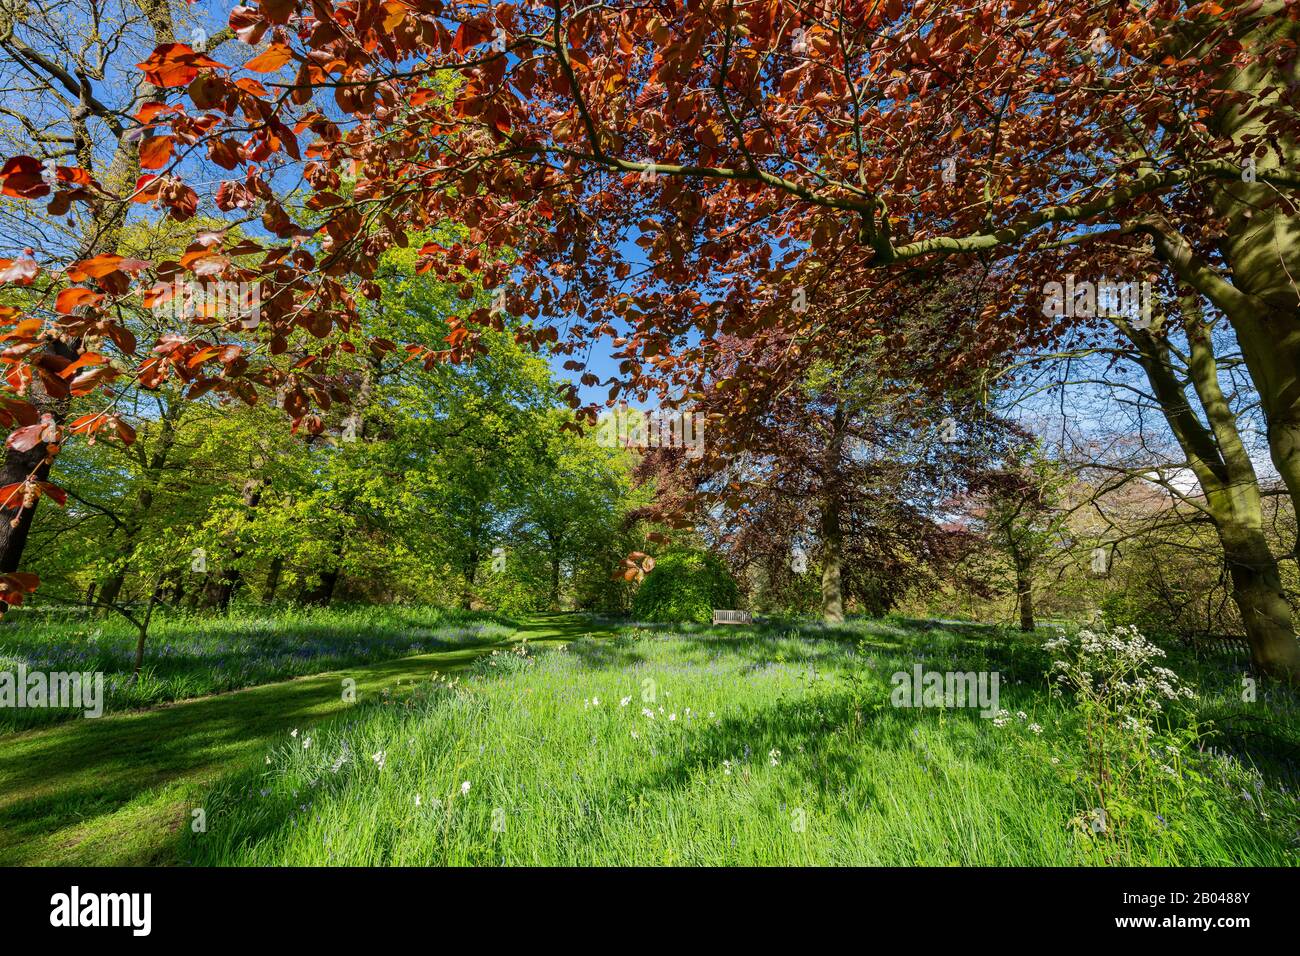 The beautiful natural landscape of the Kew Garden at Richmond, United Kingdom Stock Photo